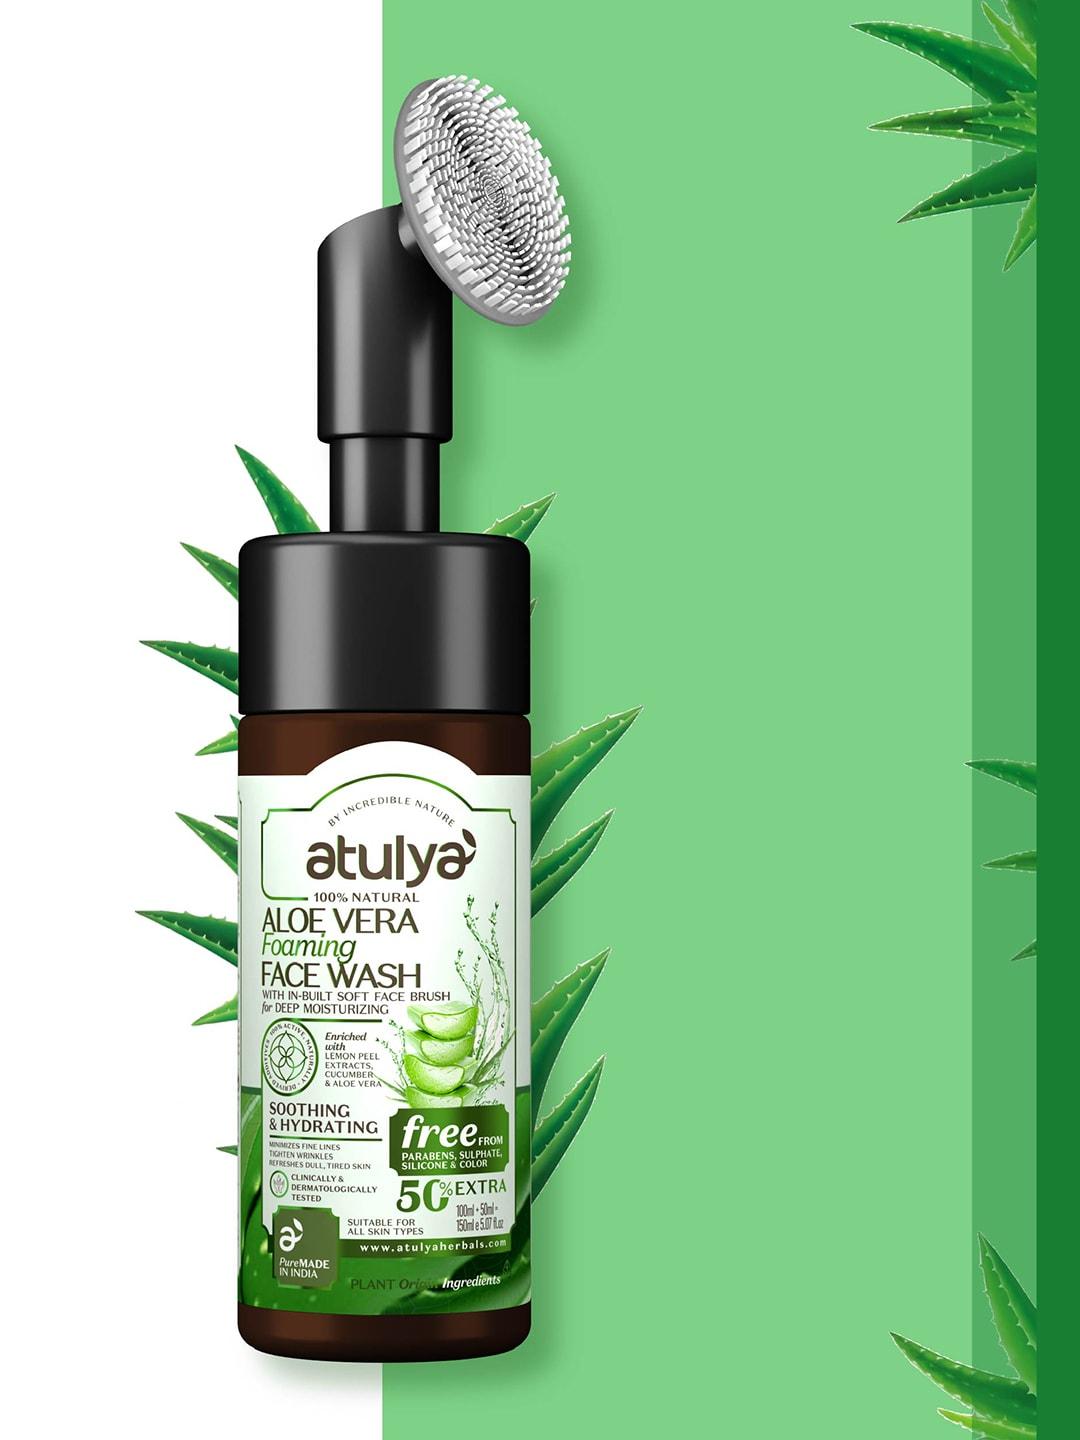 Atulya Aloe Vera Foaming Face Wash with In-Built Soft Face Brush 150 ml